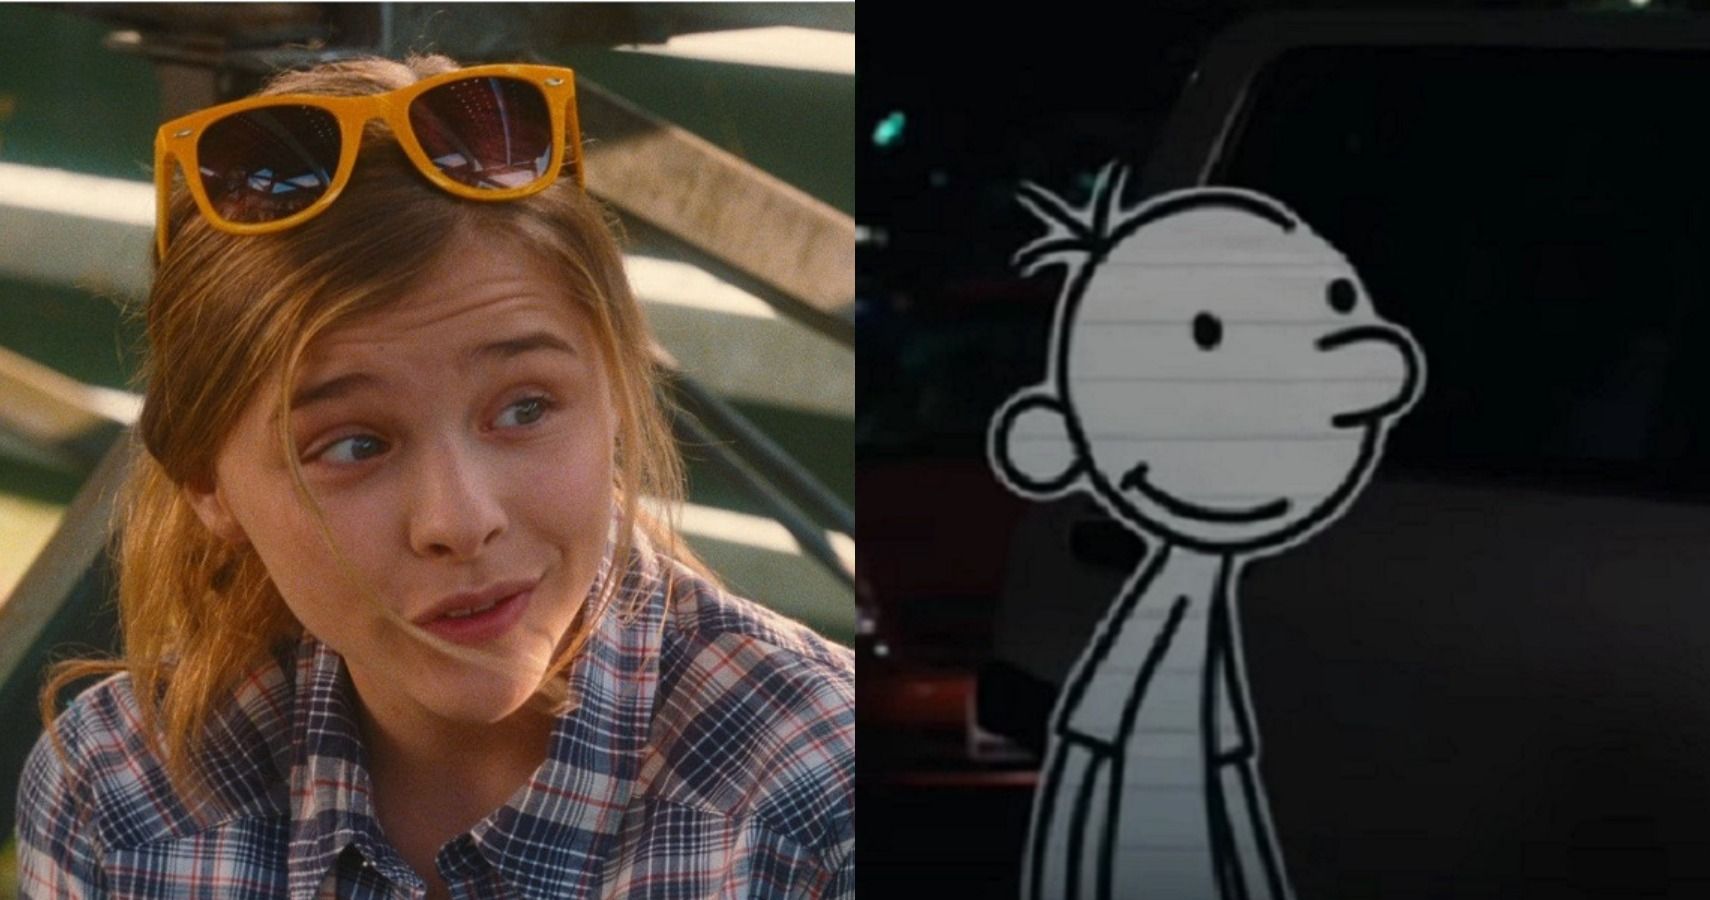 5 Best Things About The Diary Of A Wimpy Kid Trilogy (& 5 Most Underwhelming)